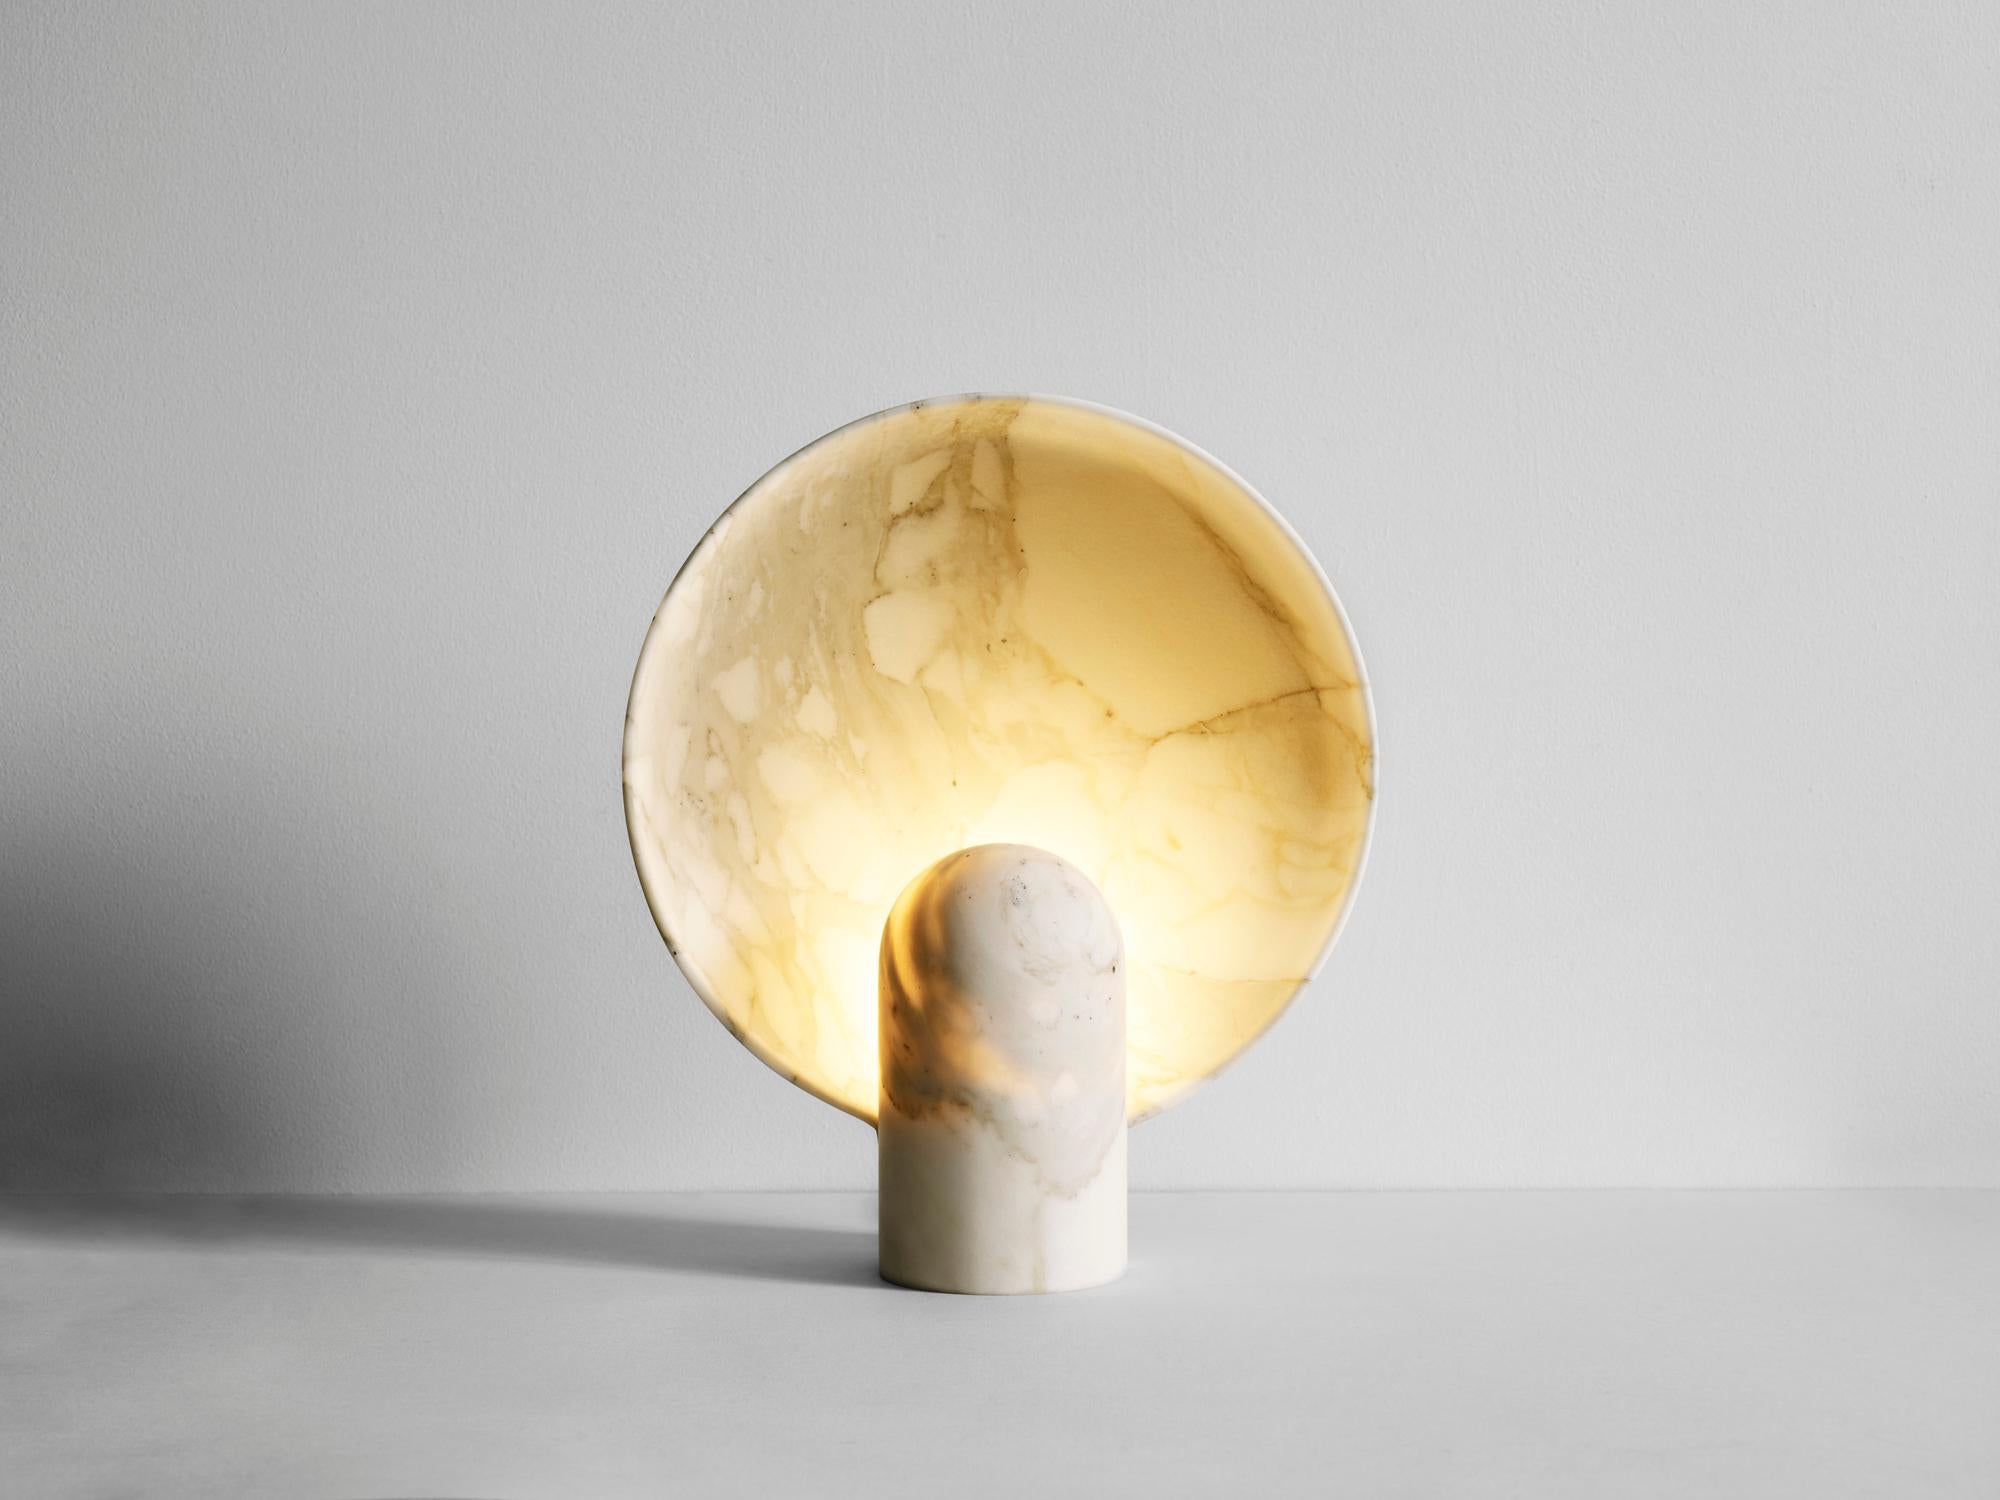 This sculptural item is handmade in Sydney Australia.

The surface sconce in Calacatta marble is an ambient, sculptural light carved in two halves from solid stone.

Each light is manufactured in natural stone, meaning variations of the pattern in